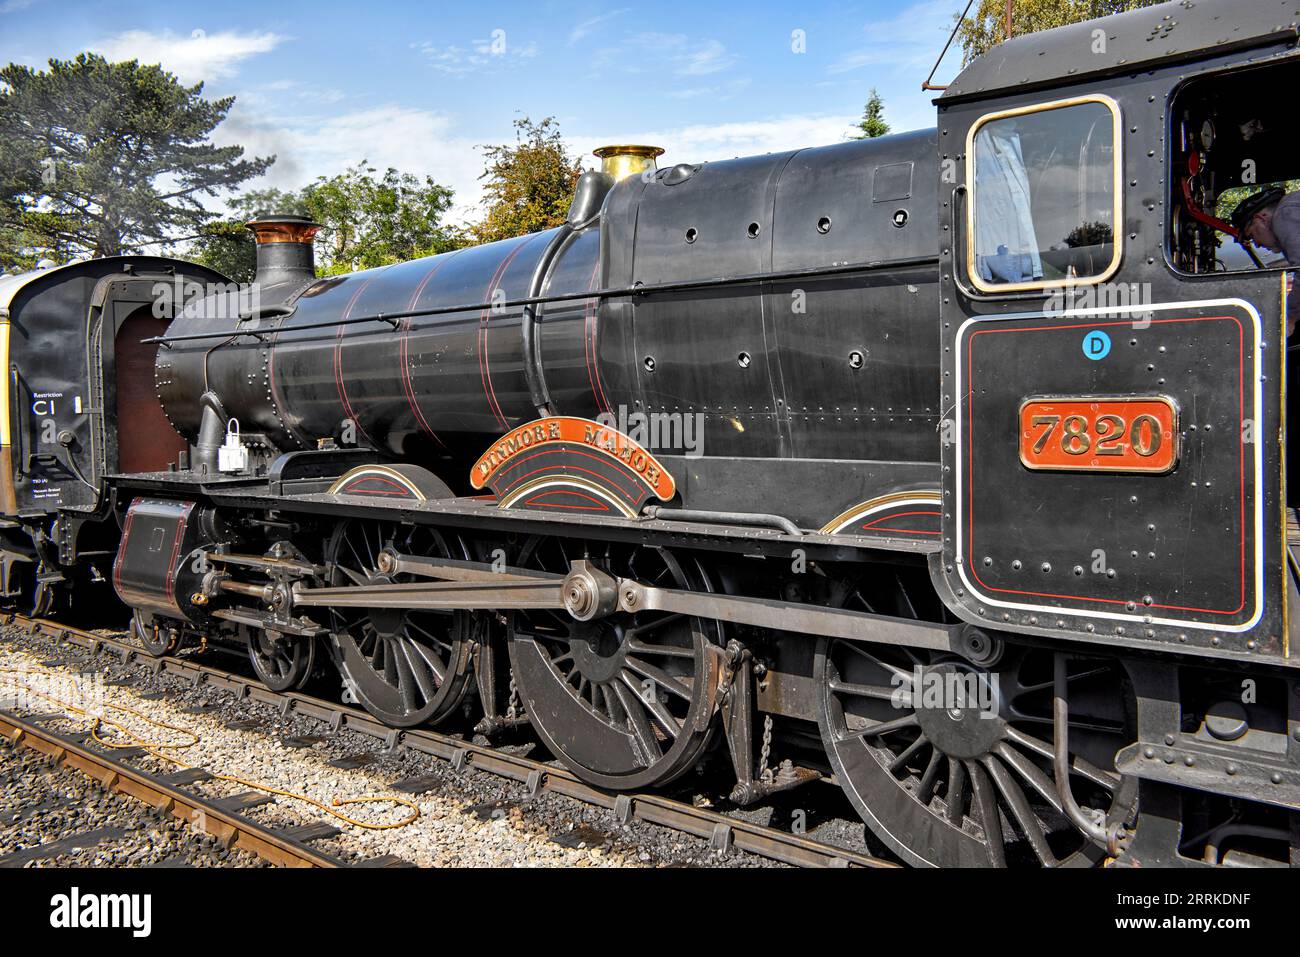 Steam train UK arriving at the GWR preserved train station Winchcombe Gloucestershire England. No 7820 Dinmore Manor Stock Photo